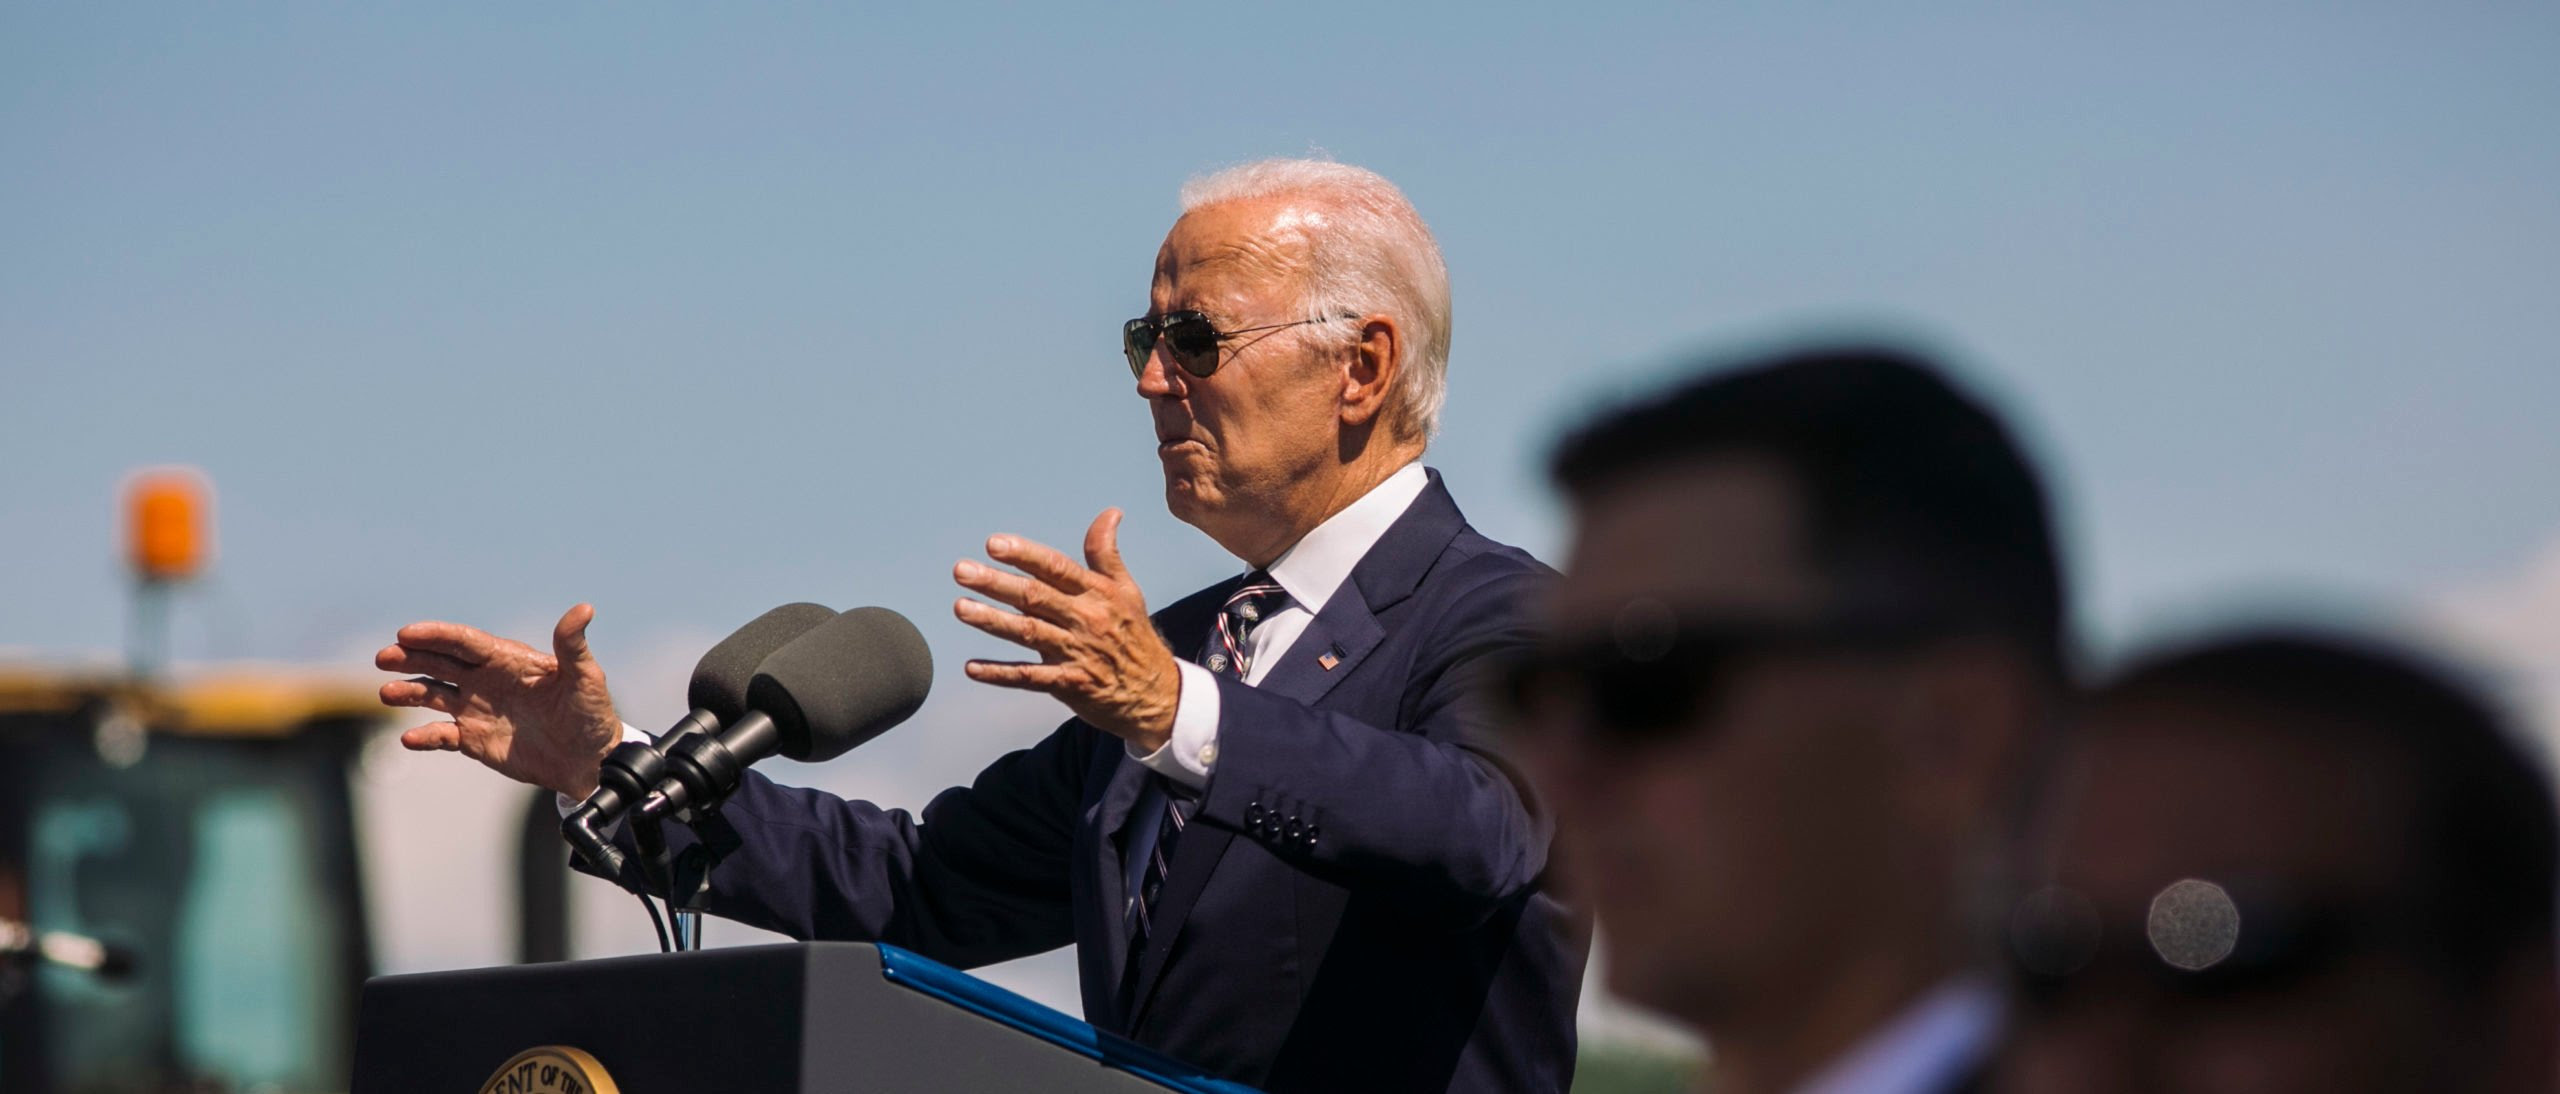 Biden DOJ Pushes For Judge To Appoint Dem Donor As Special Master